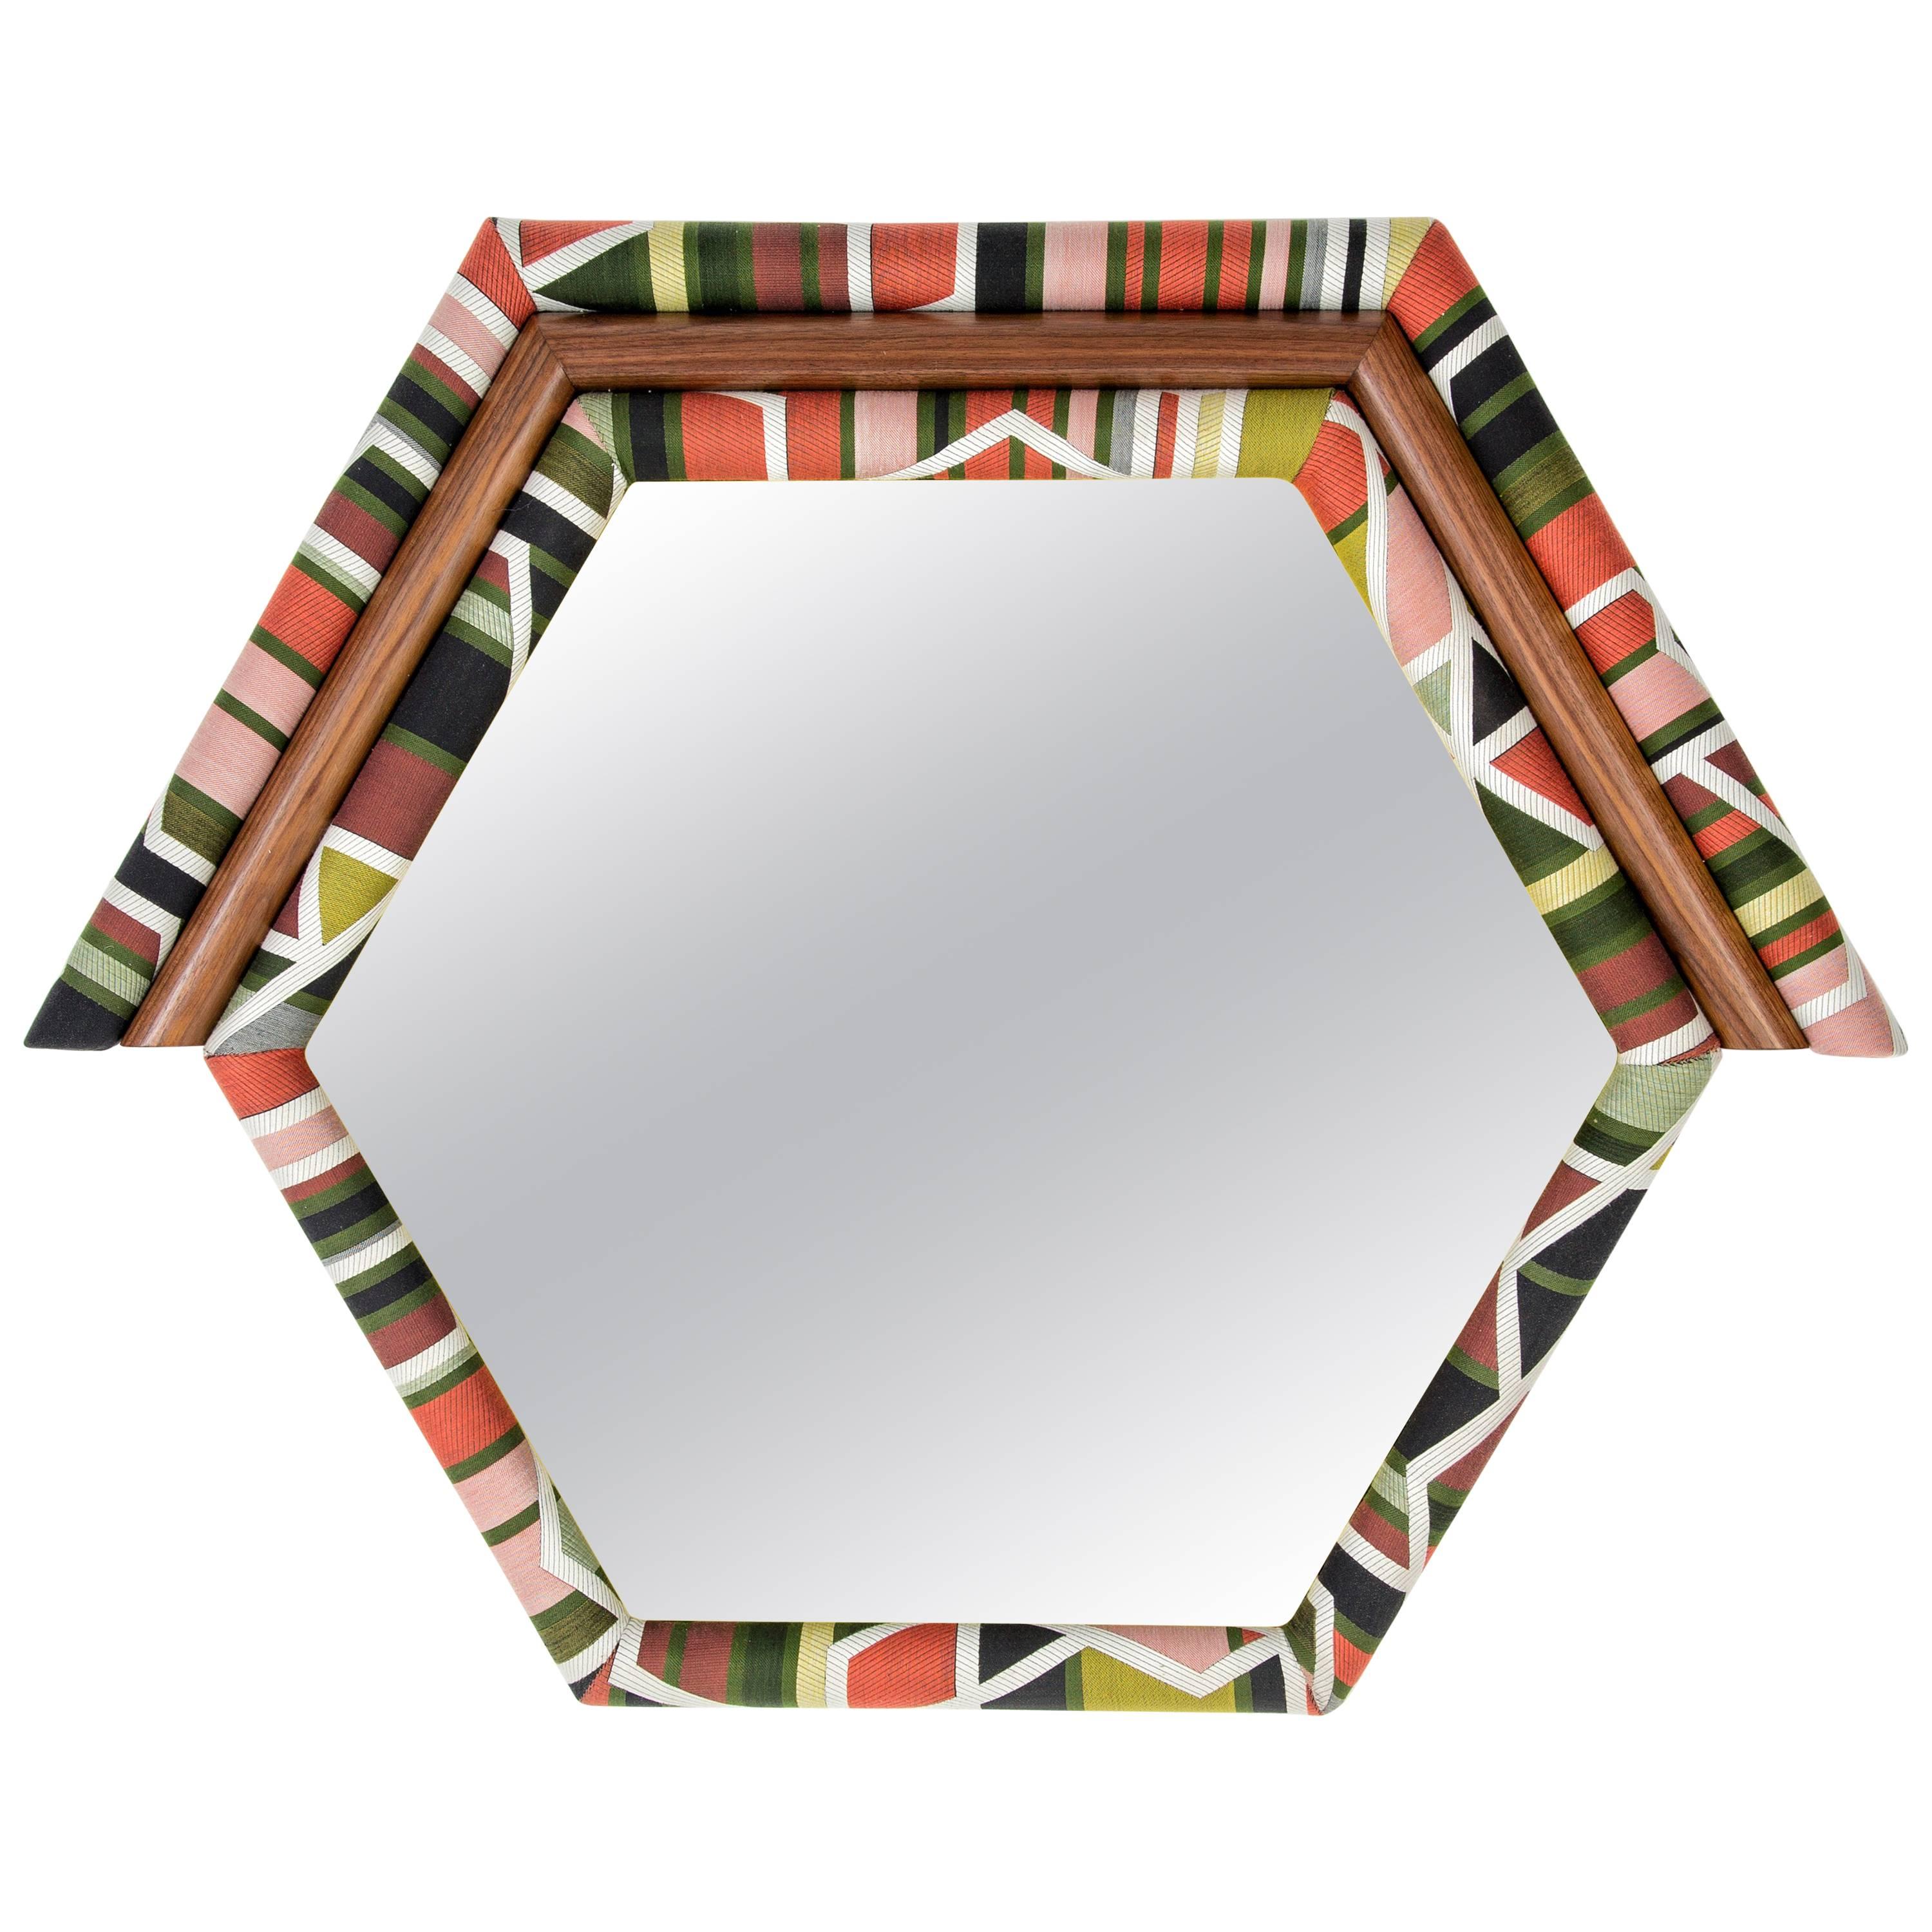 Contemporary Handcrafted and Upholstered American Walnut Pontiac Hexagon Mirror